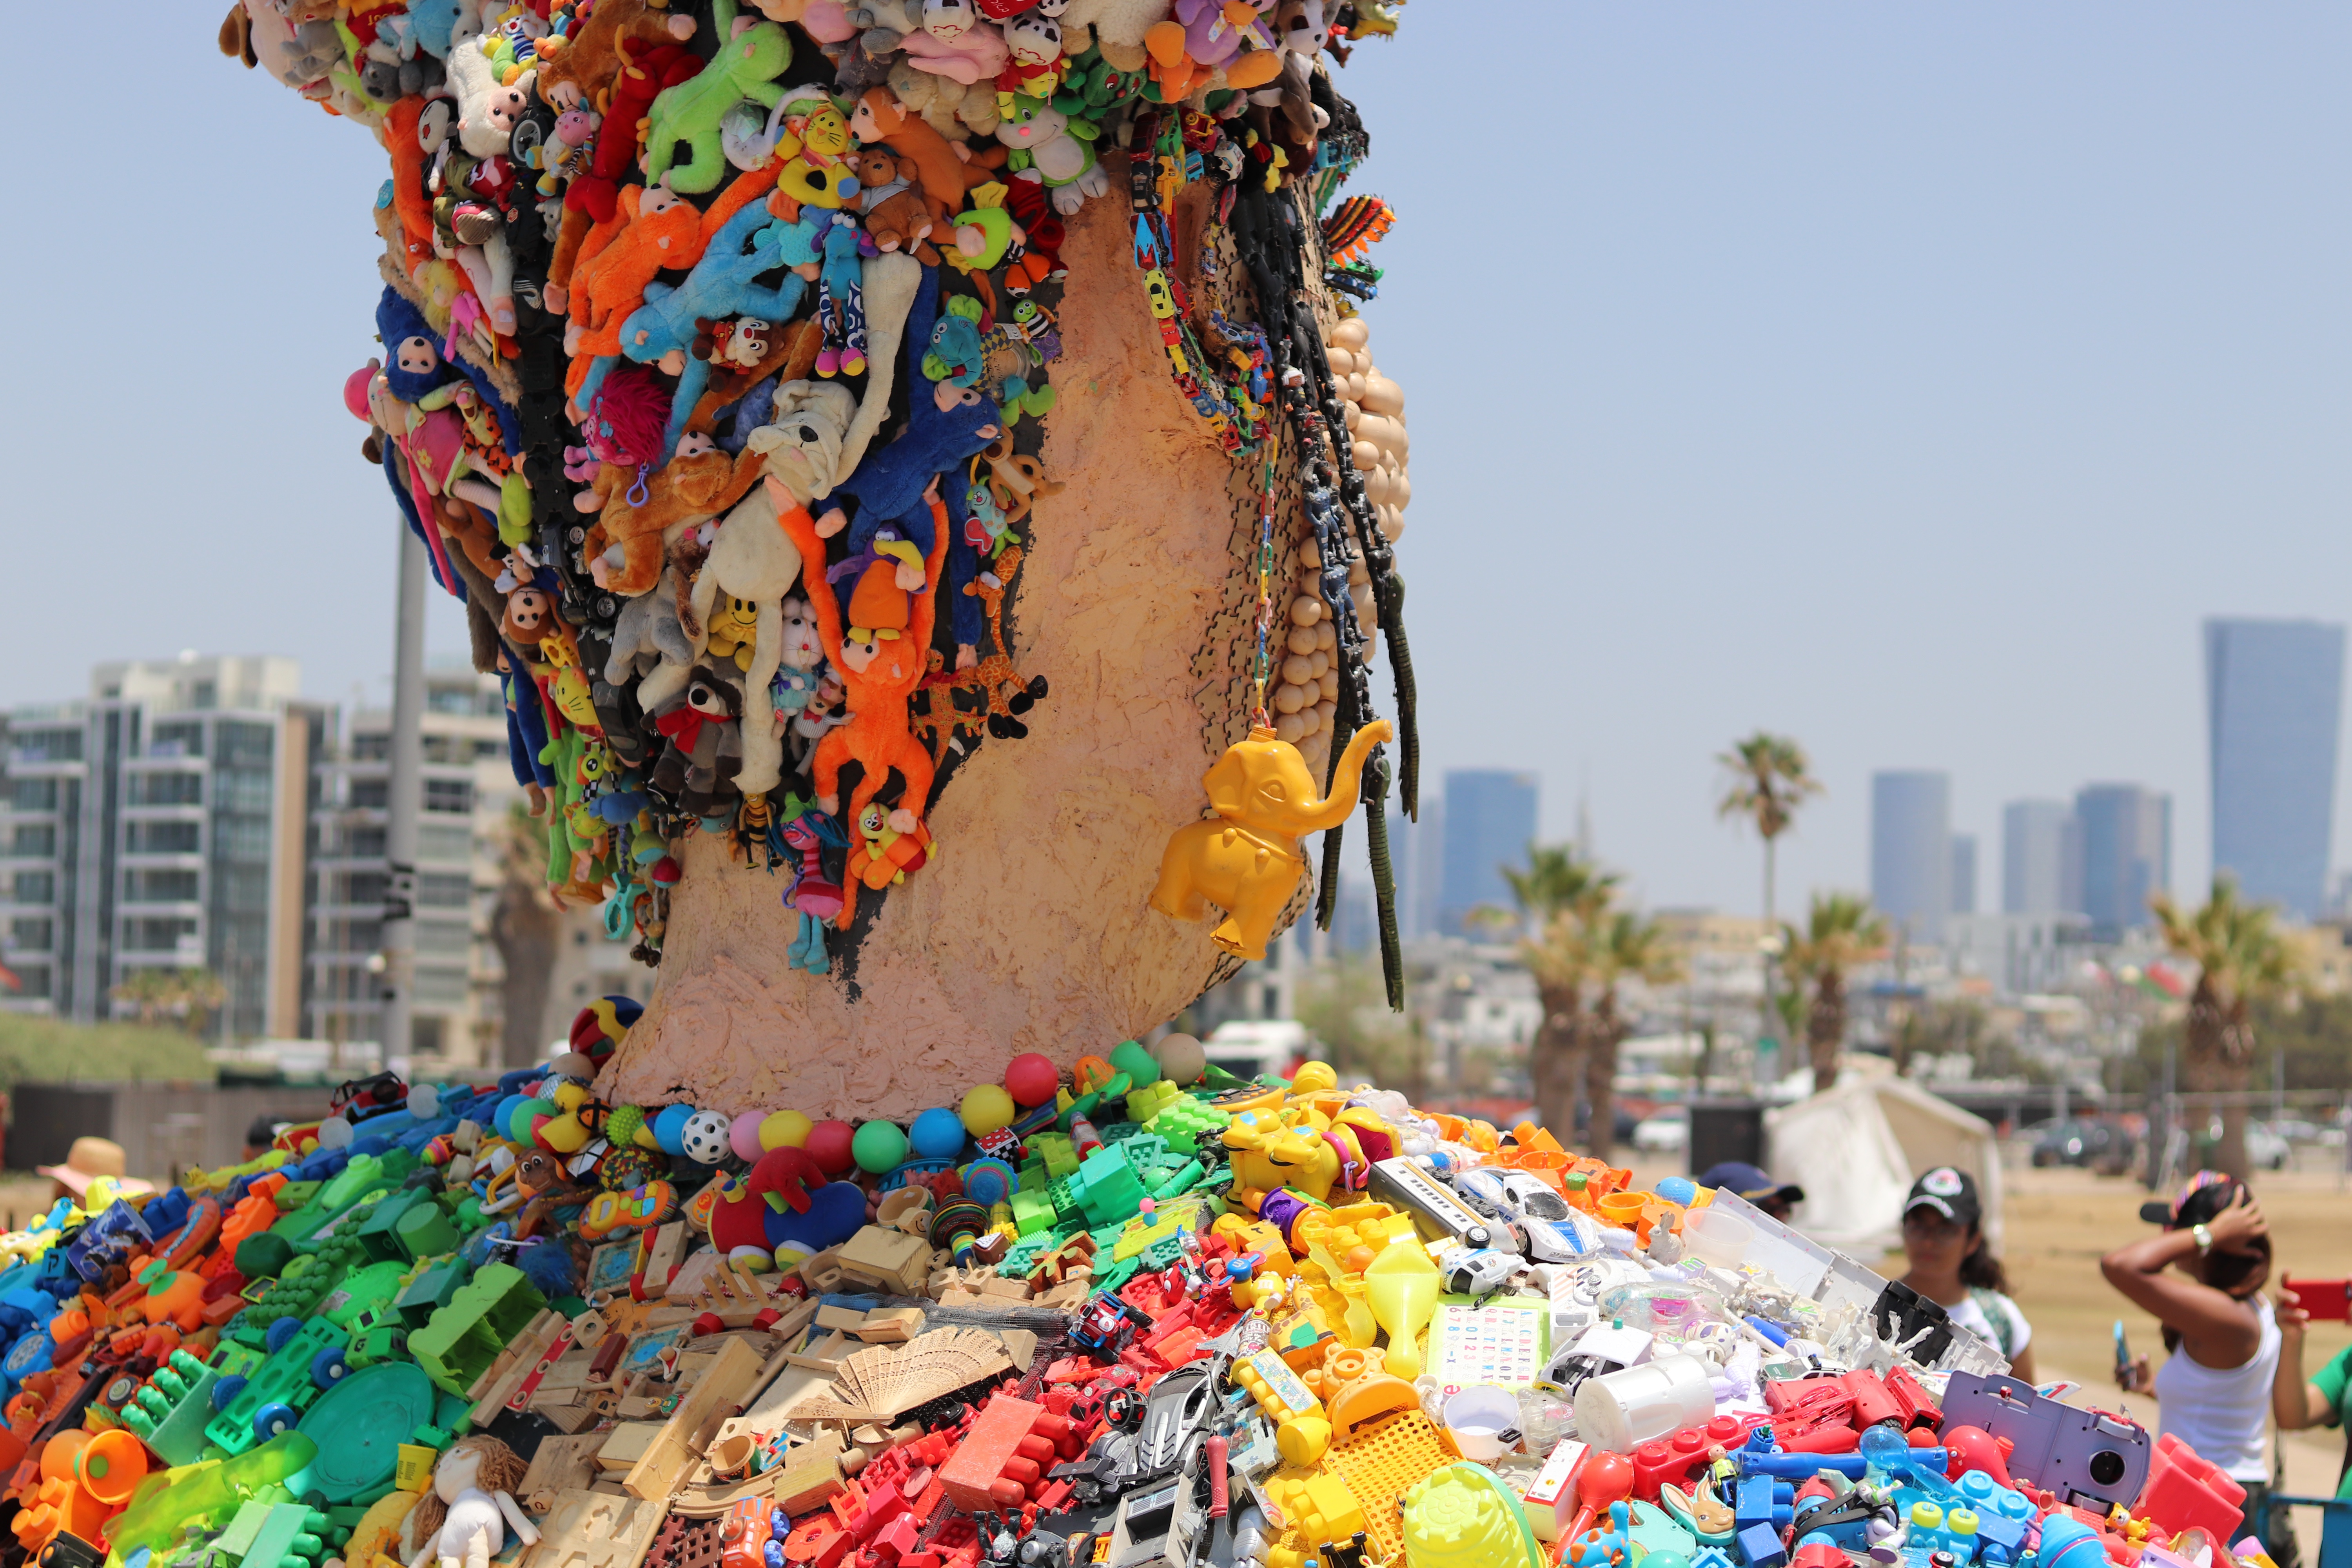 Netta sculpture made out of toys